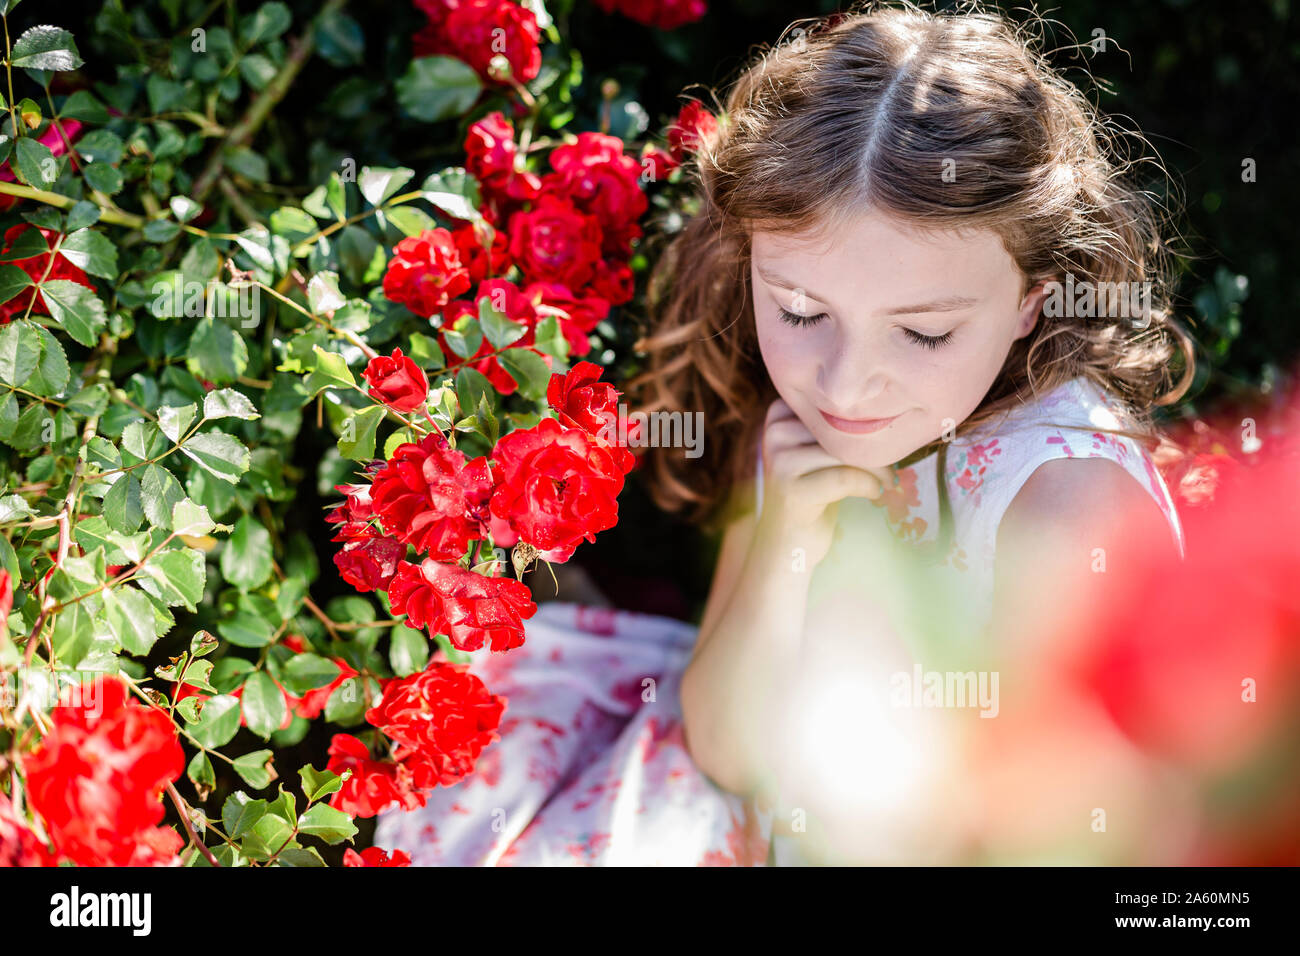 Portrait of girl with eyes closed sitting beside red rosebush Stock Photo